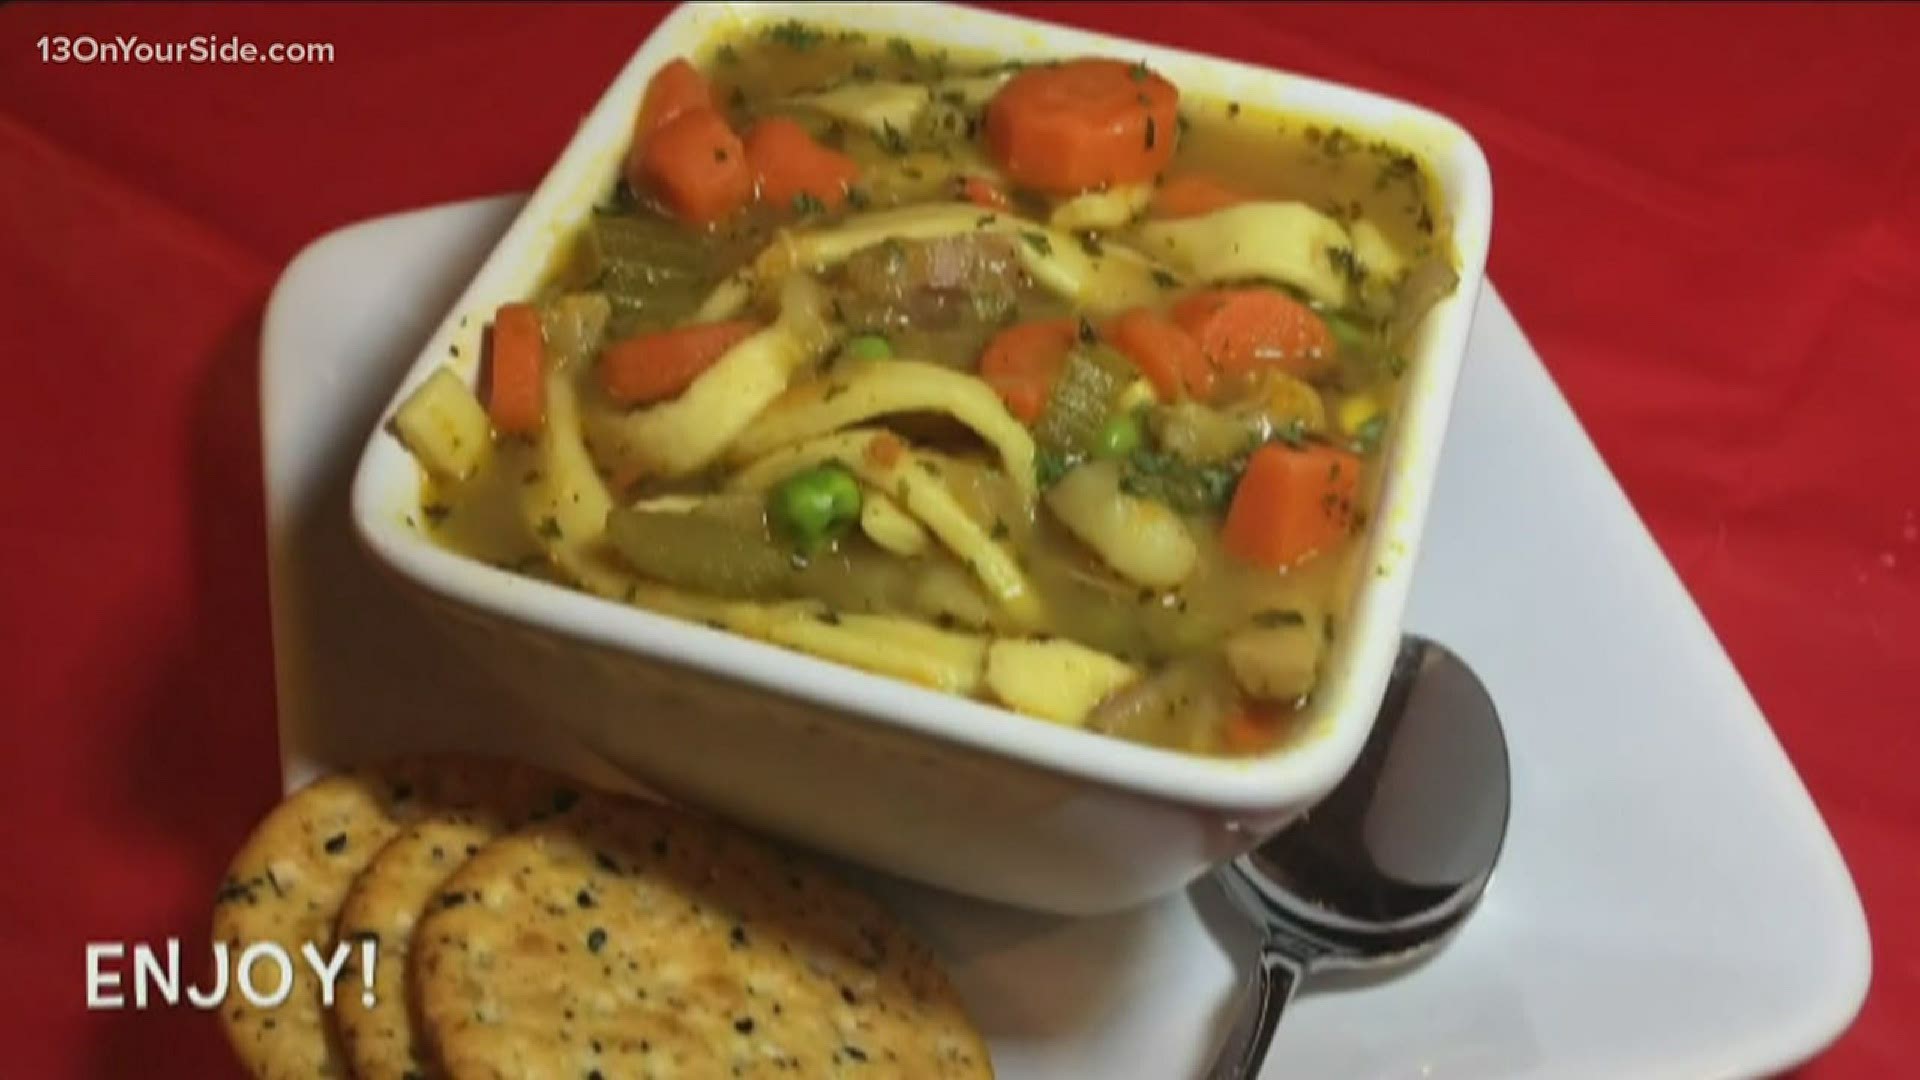 With the cold temperatures swooping in, this turkey noodle soup might be the perfect recipe for a night at home.